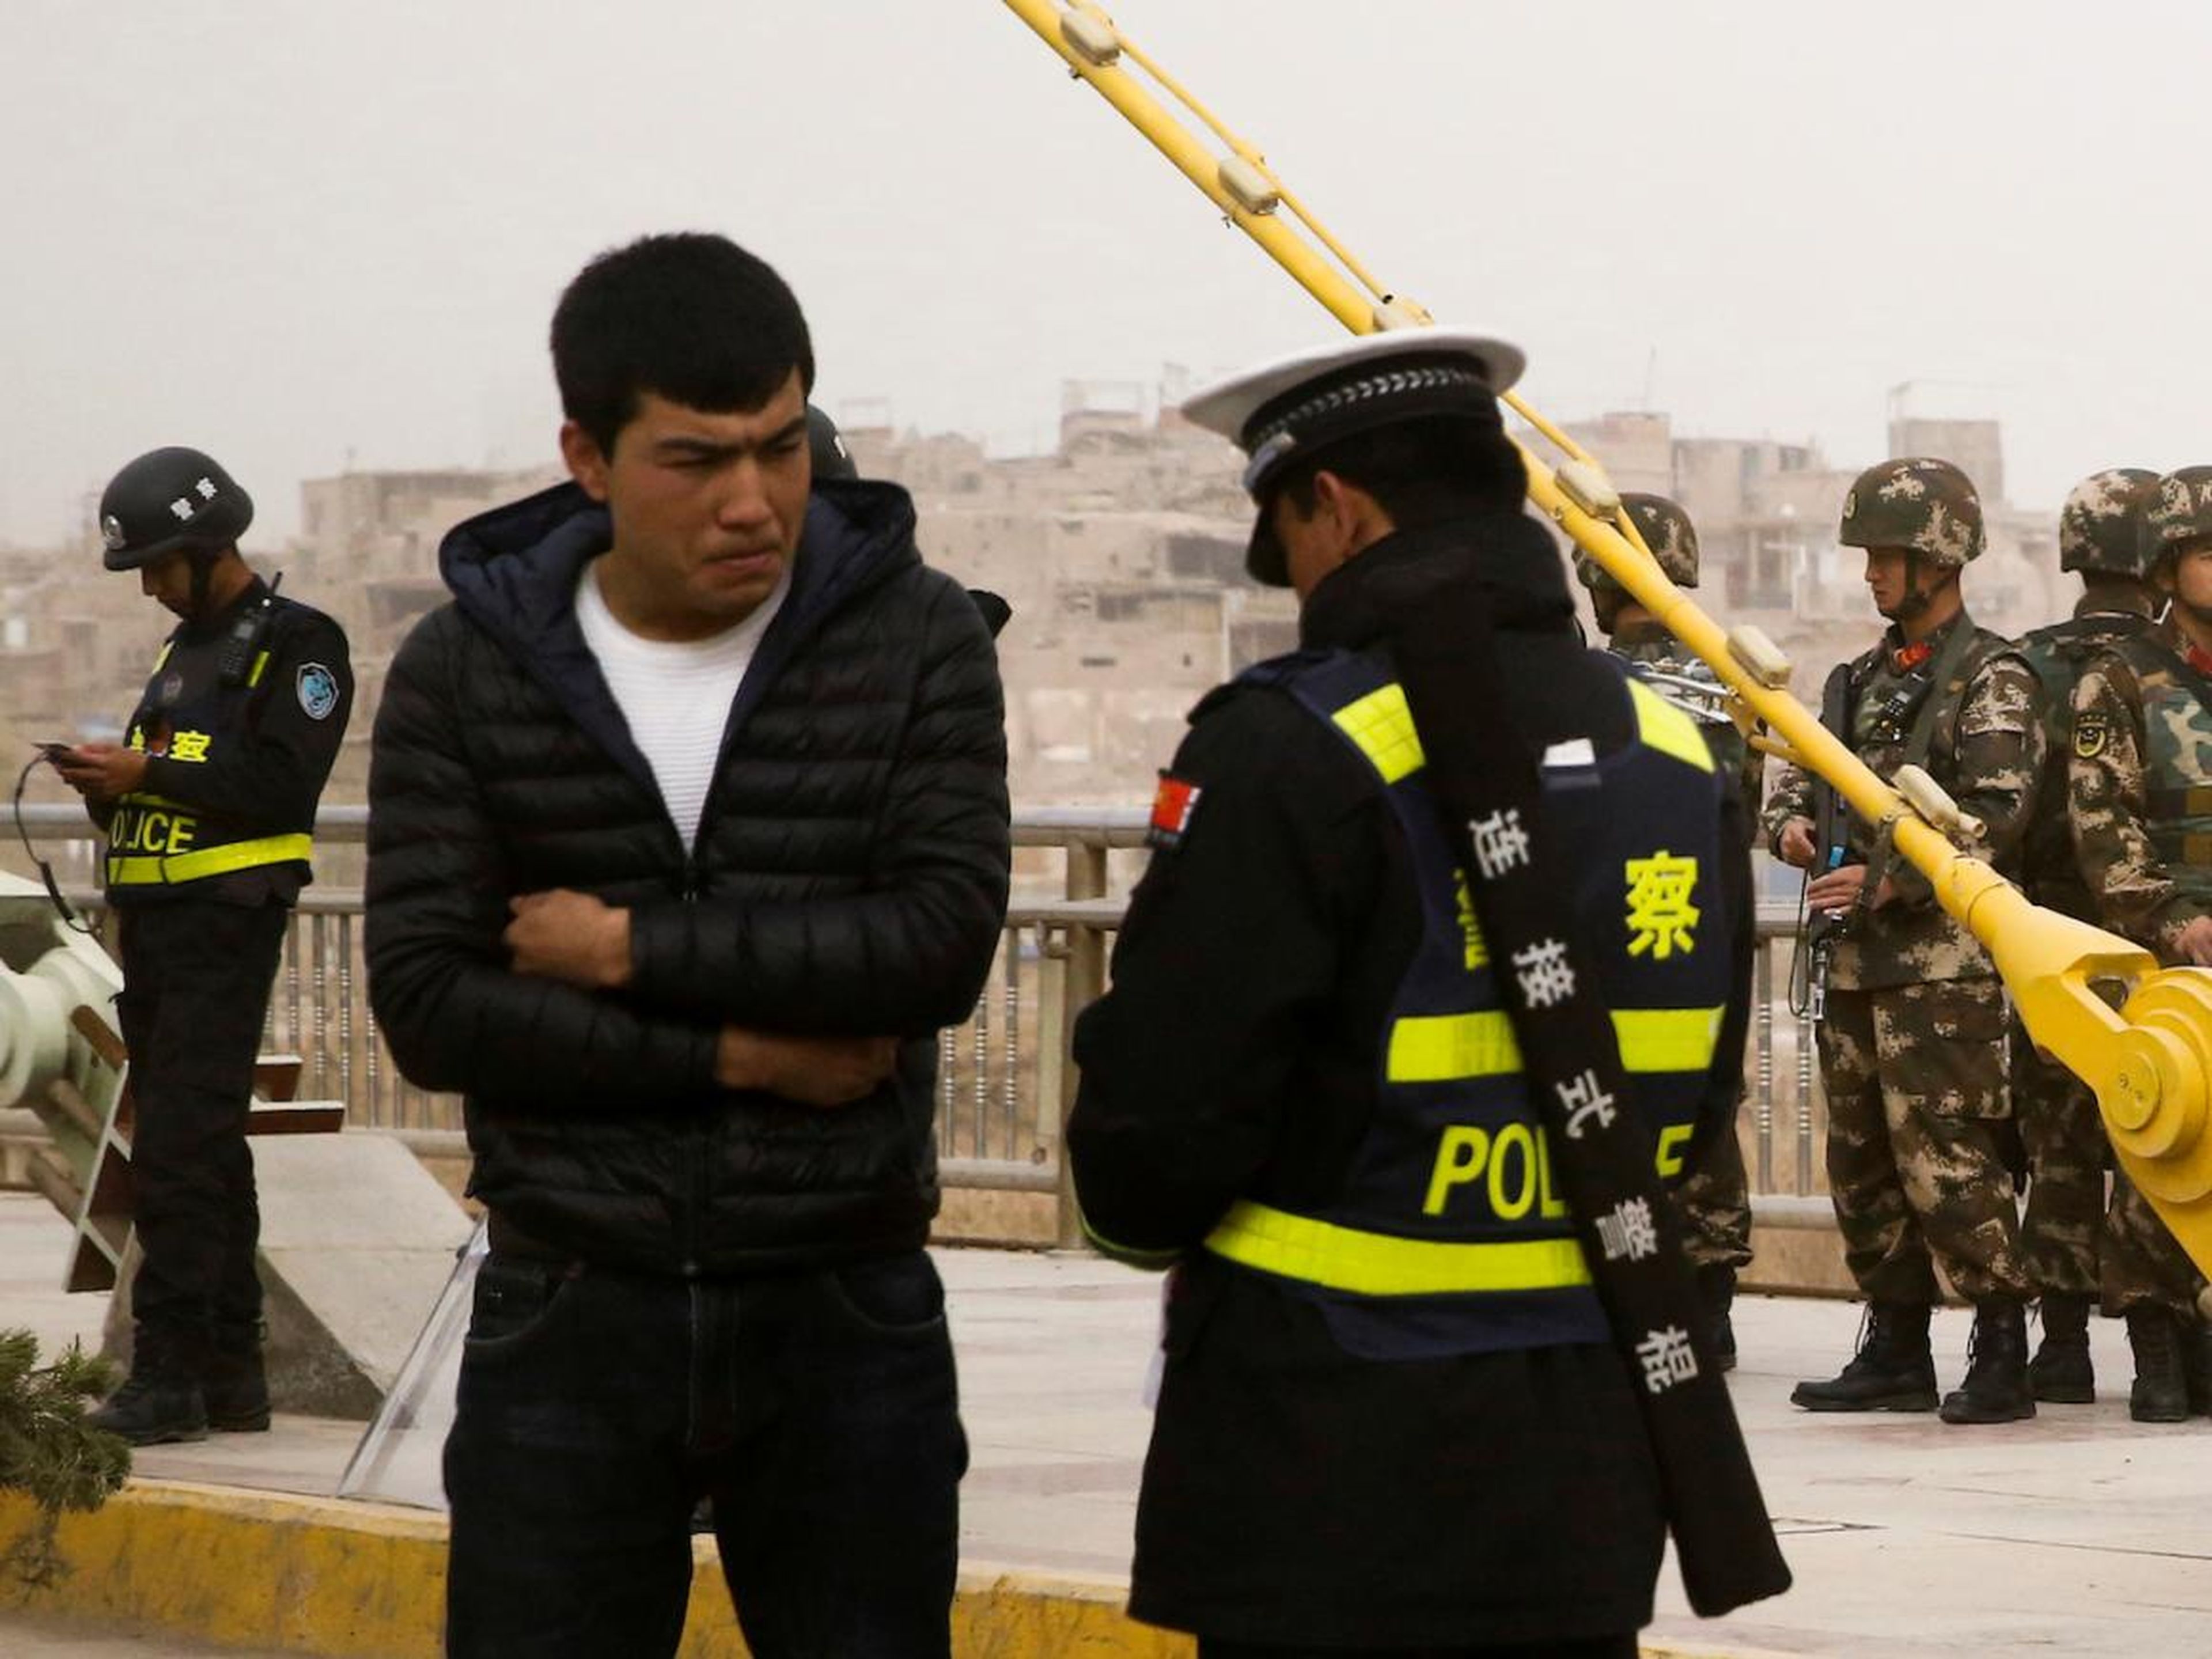 A police officer checks a Uighur man's ID documents in Kashgar, Xinjiang, in March 2017.